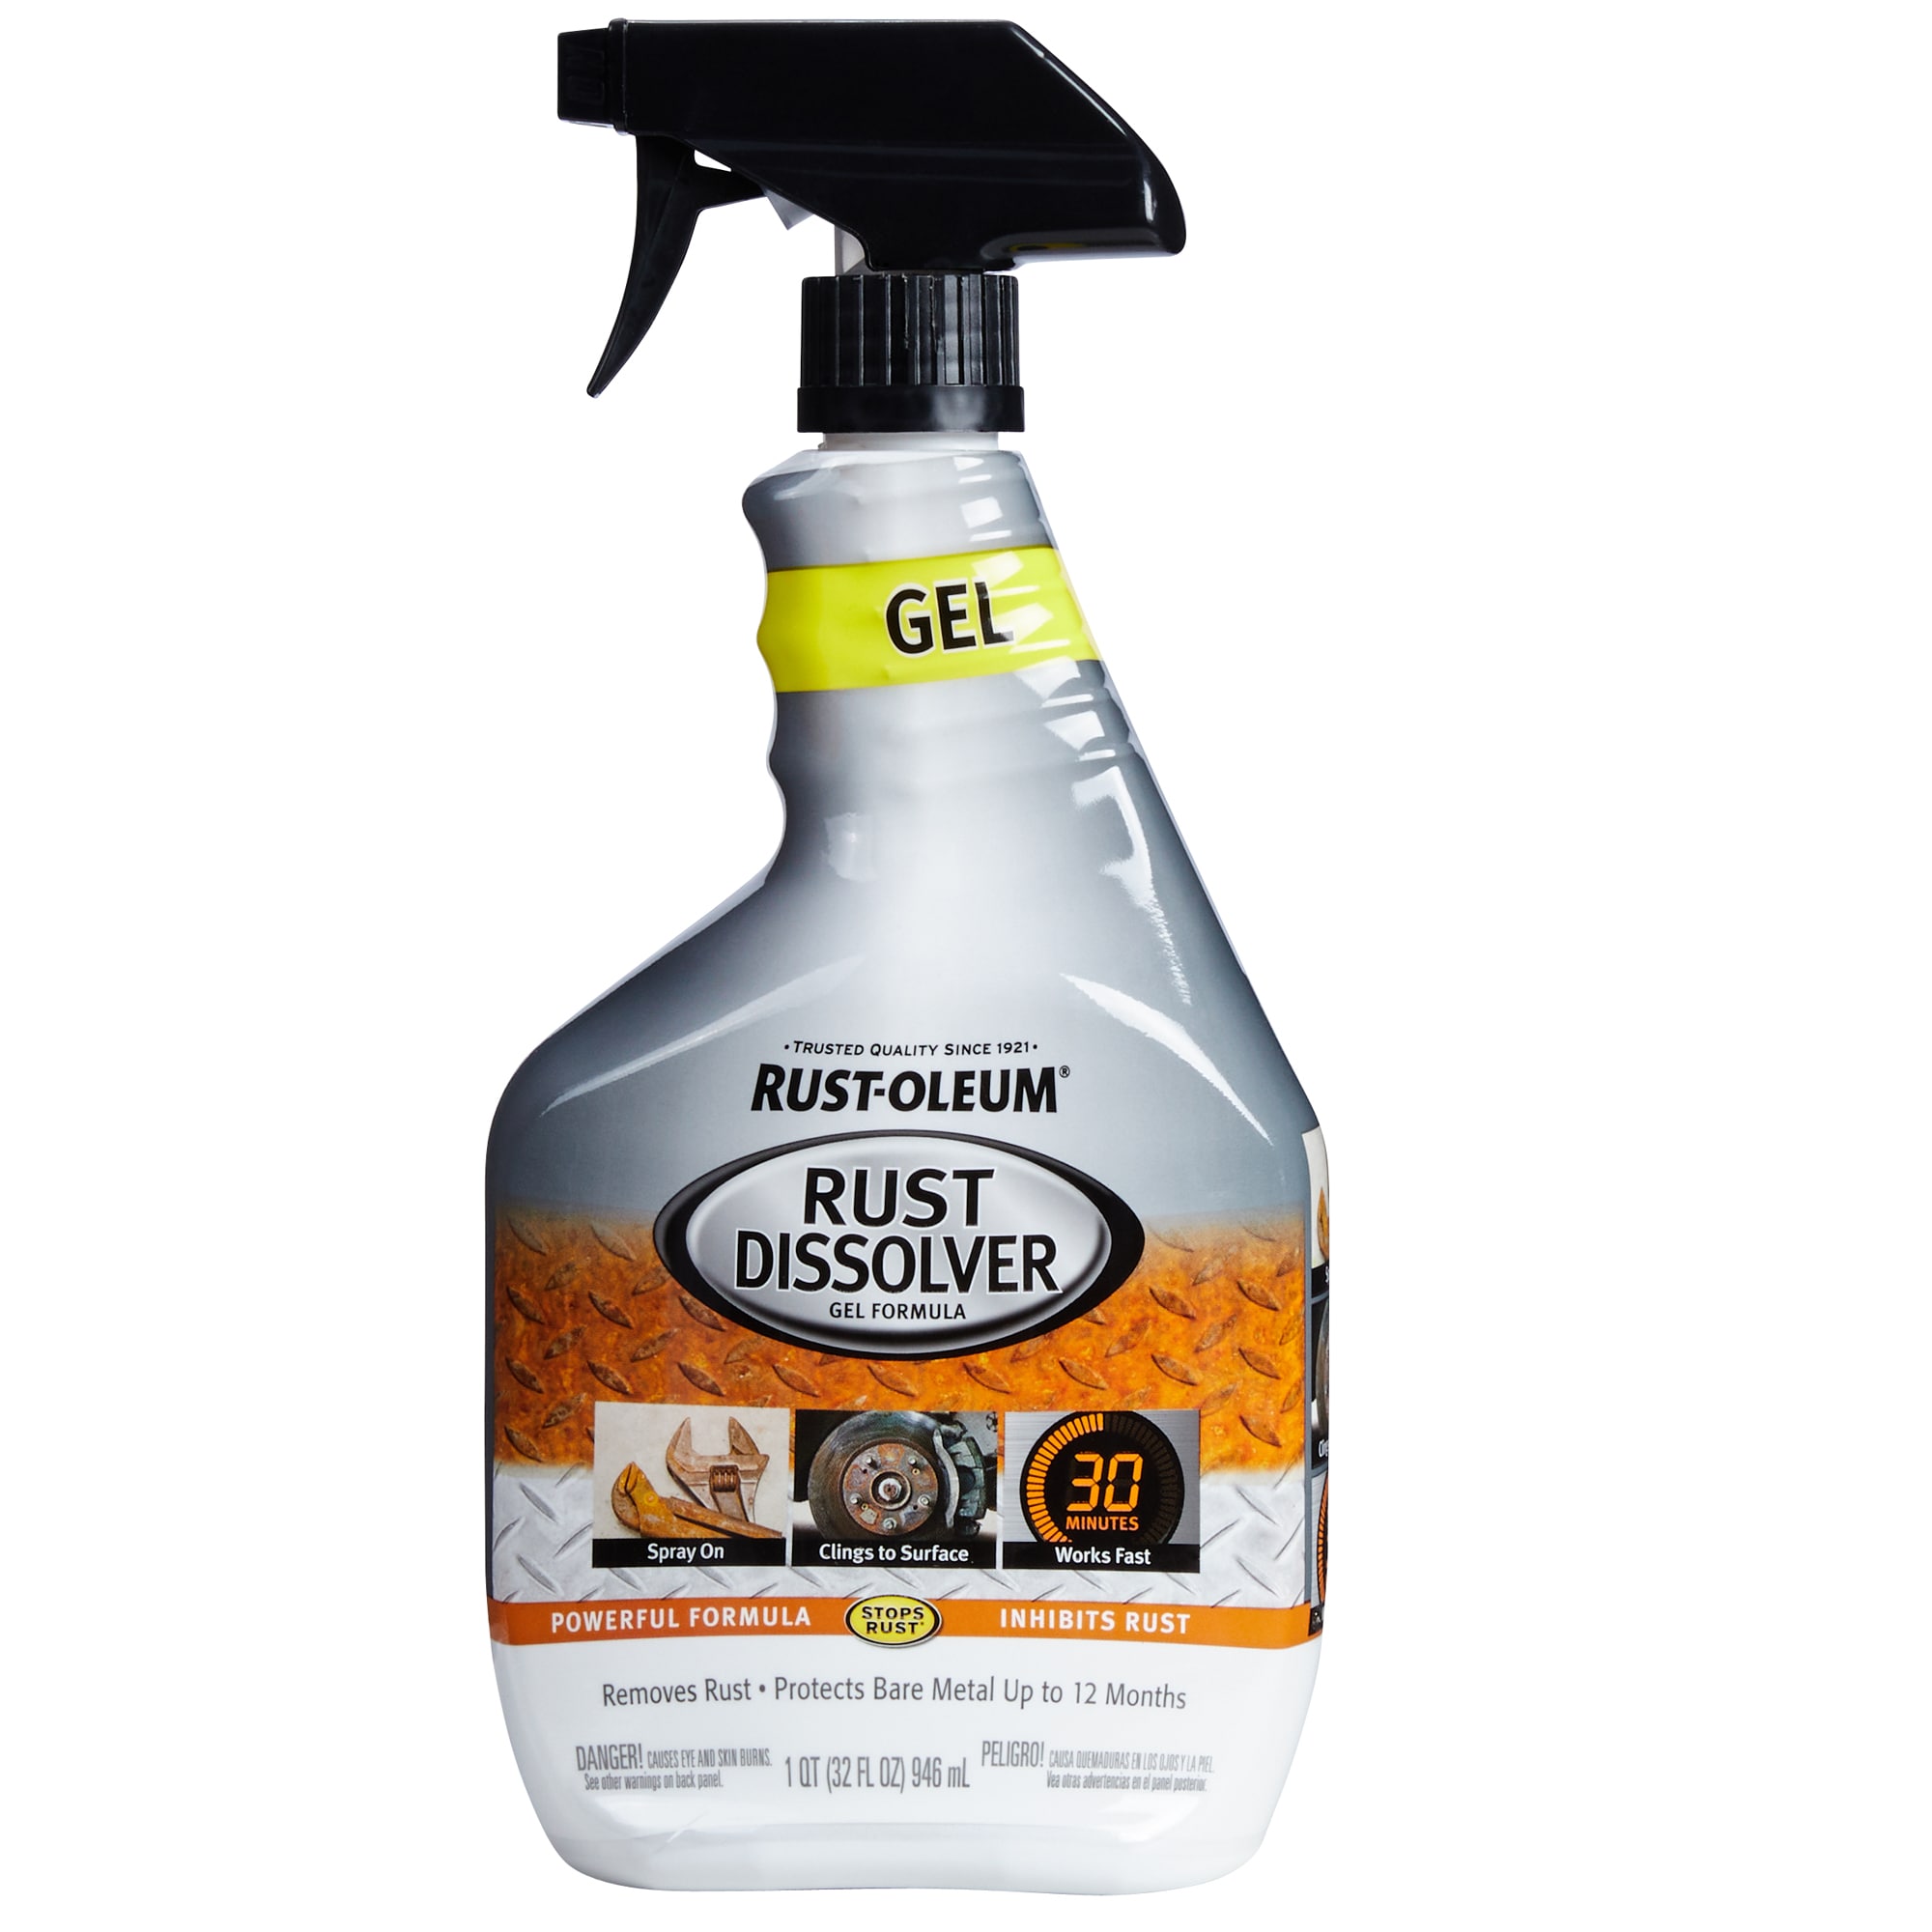 RustAid Goof Off Rust Stain Remover - 1 gal bottle